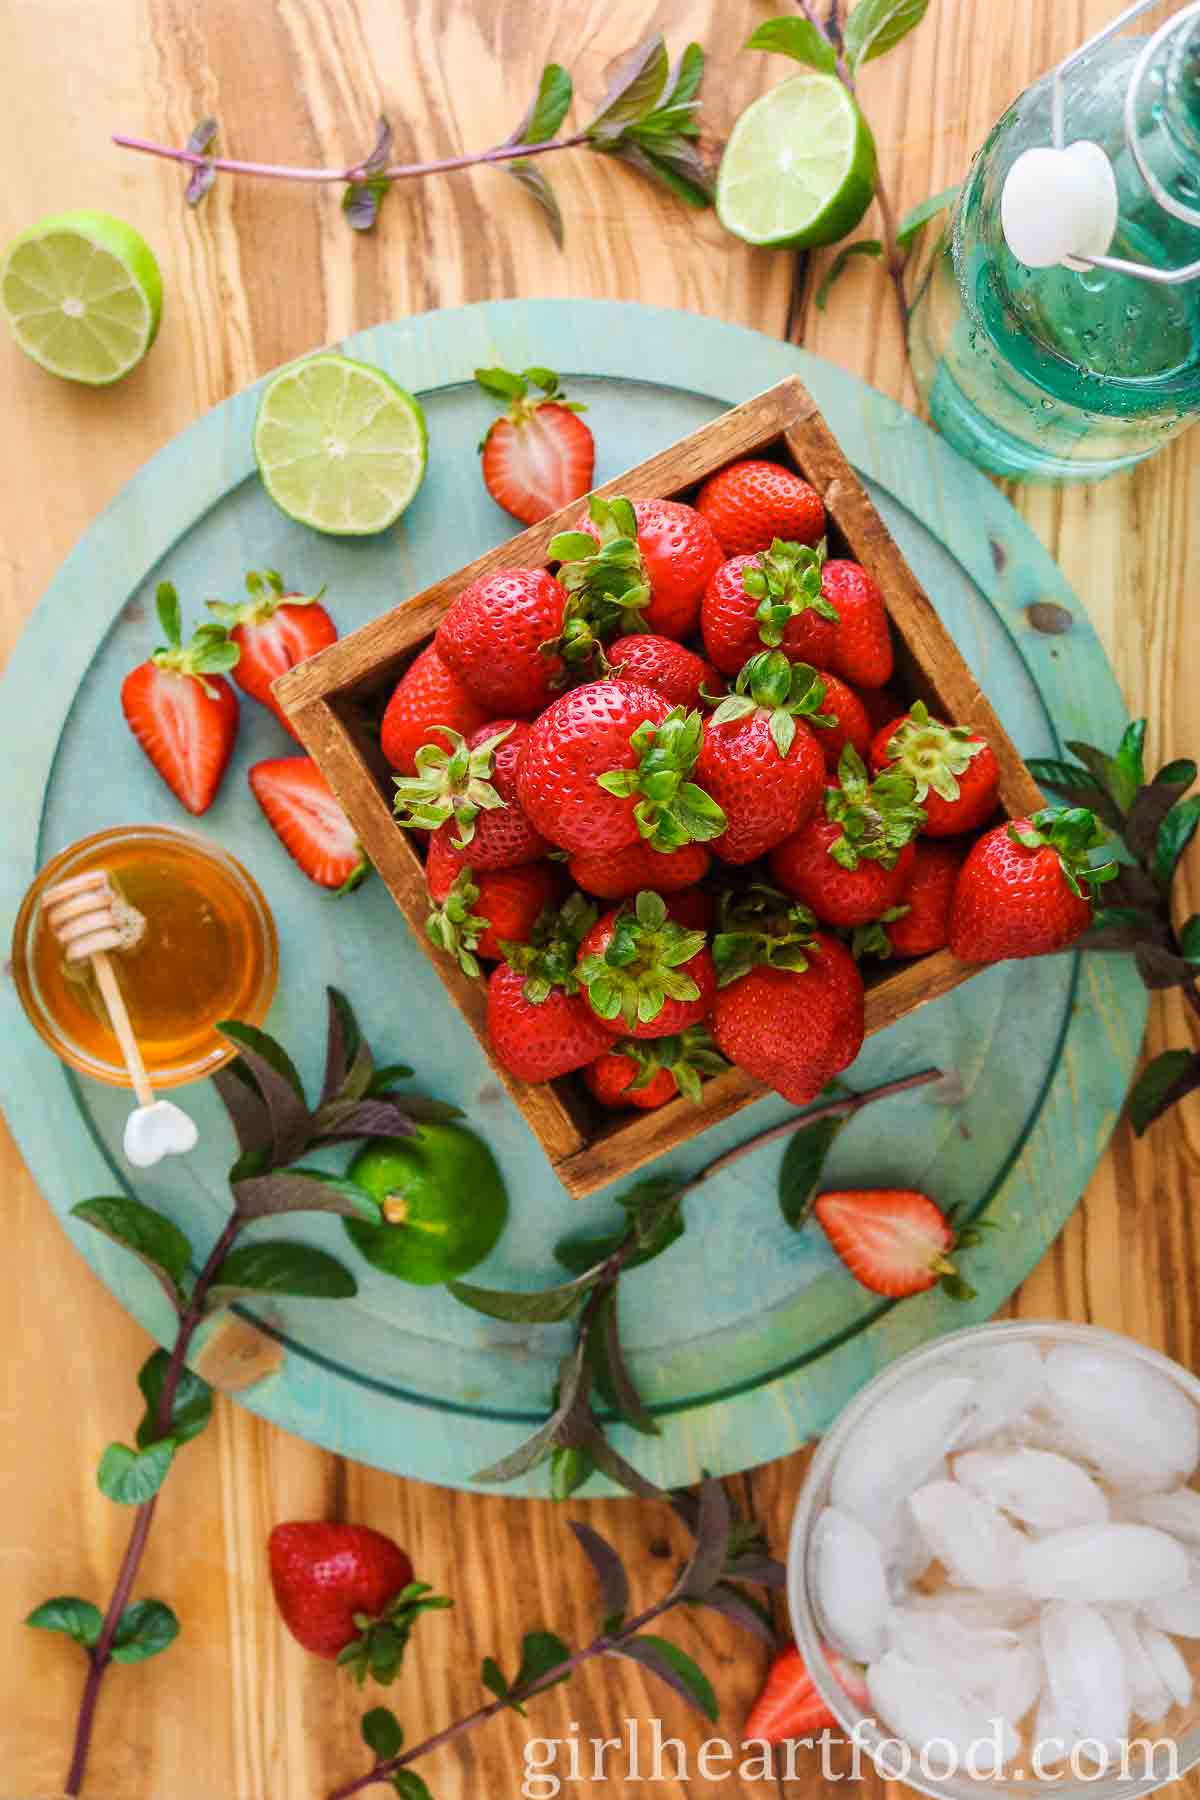 Ingredients for a non-alcoholic strawberry cocktail.